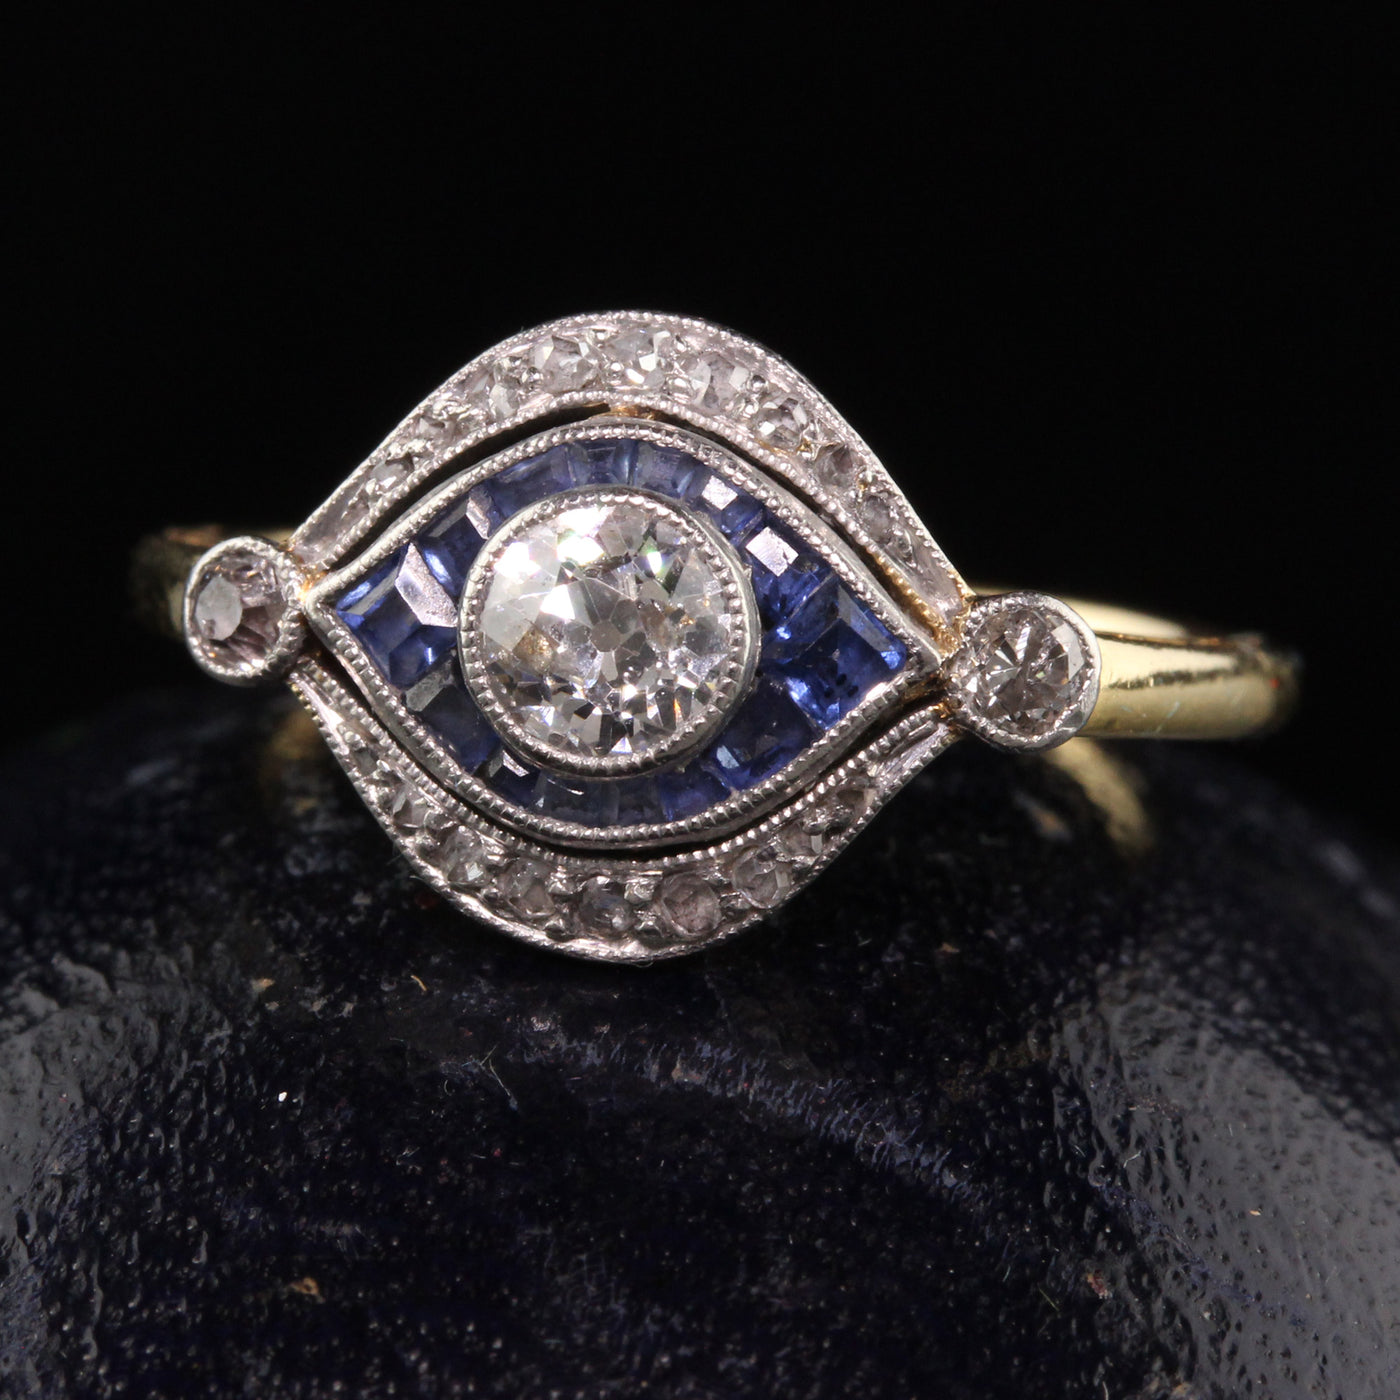 RESERVED - Antique Edwardian 18K Yellow Gold Old Euro Diamond and Sapphire Engagement Ring